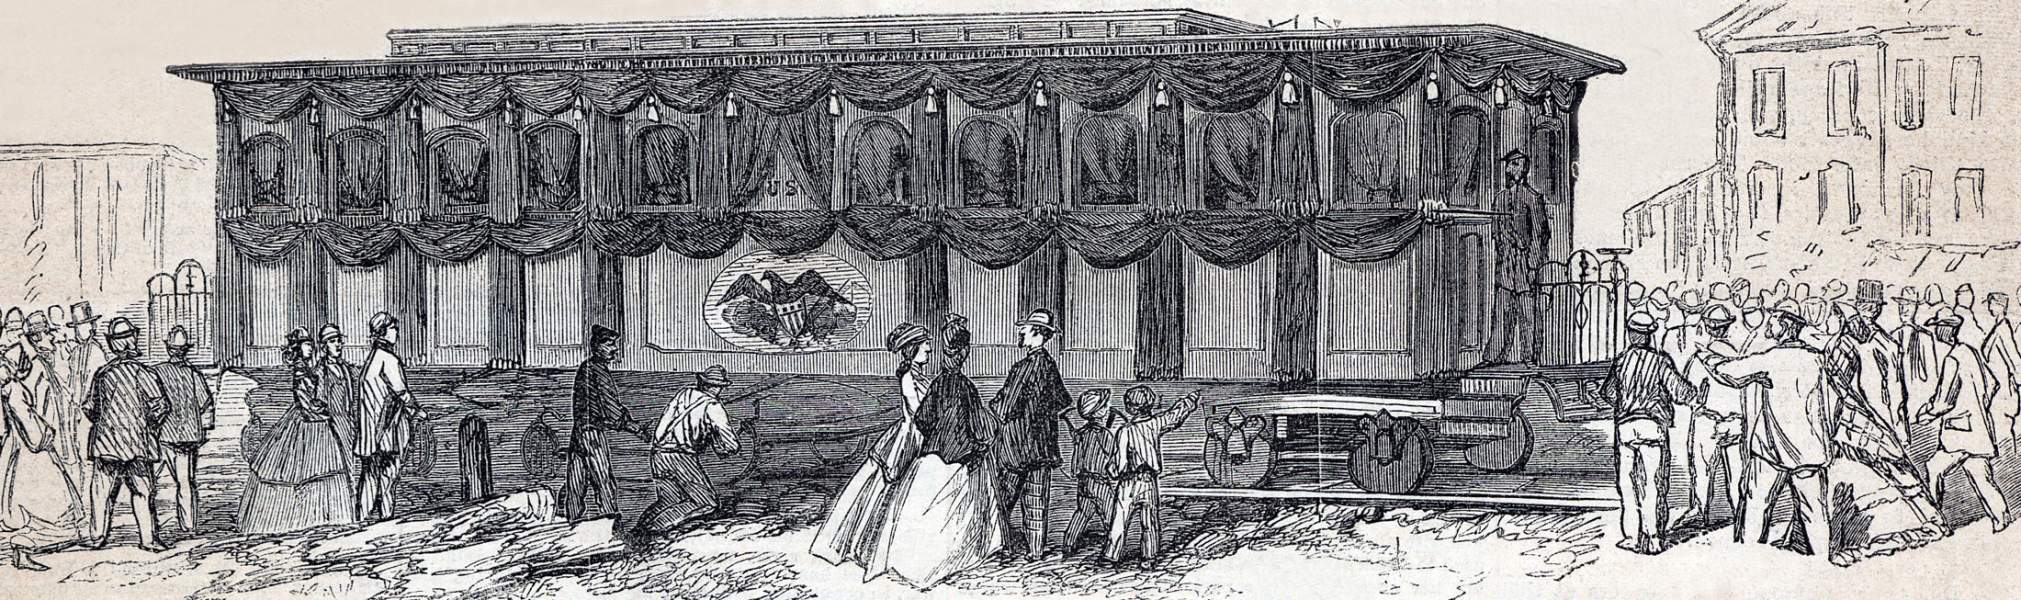 President Lincoln's Funeral Car, New York City, April 24, 1865, artist's impression, zoomable image